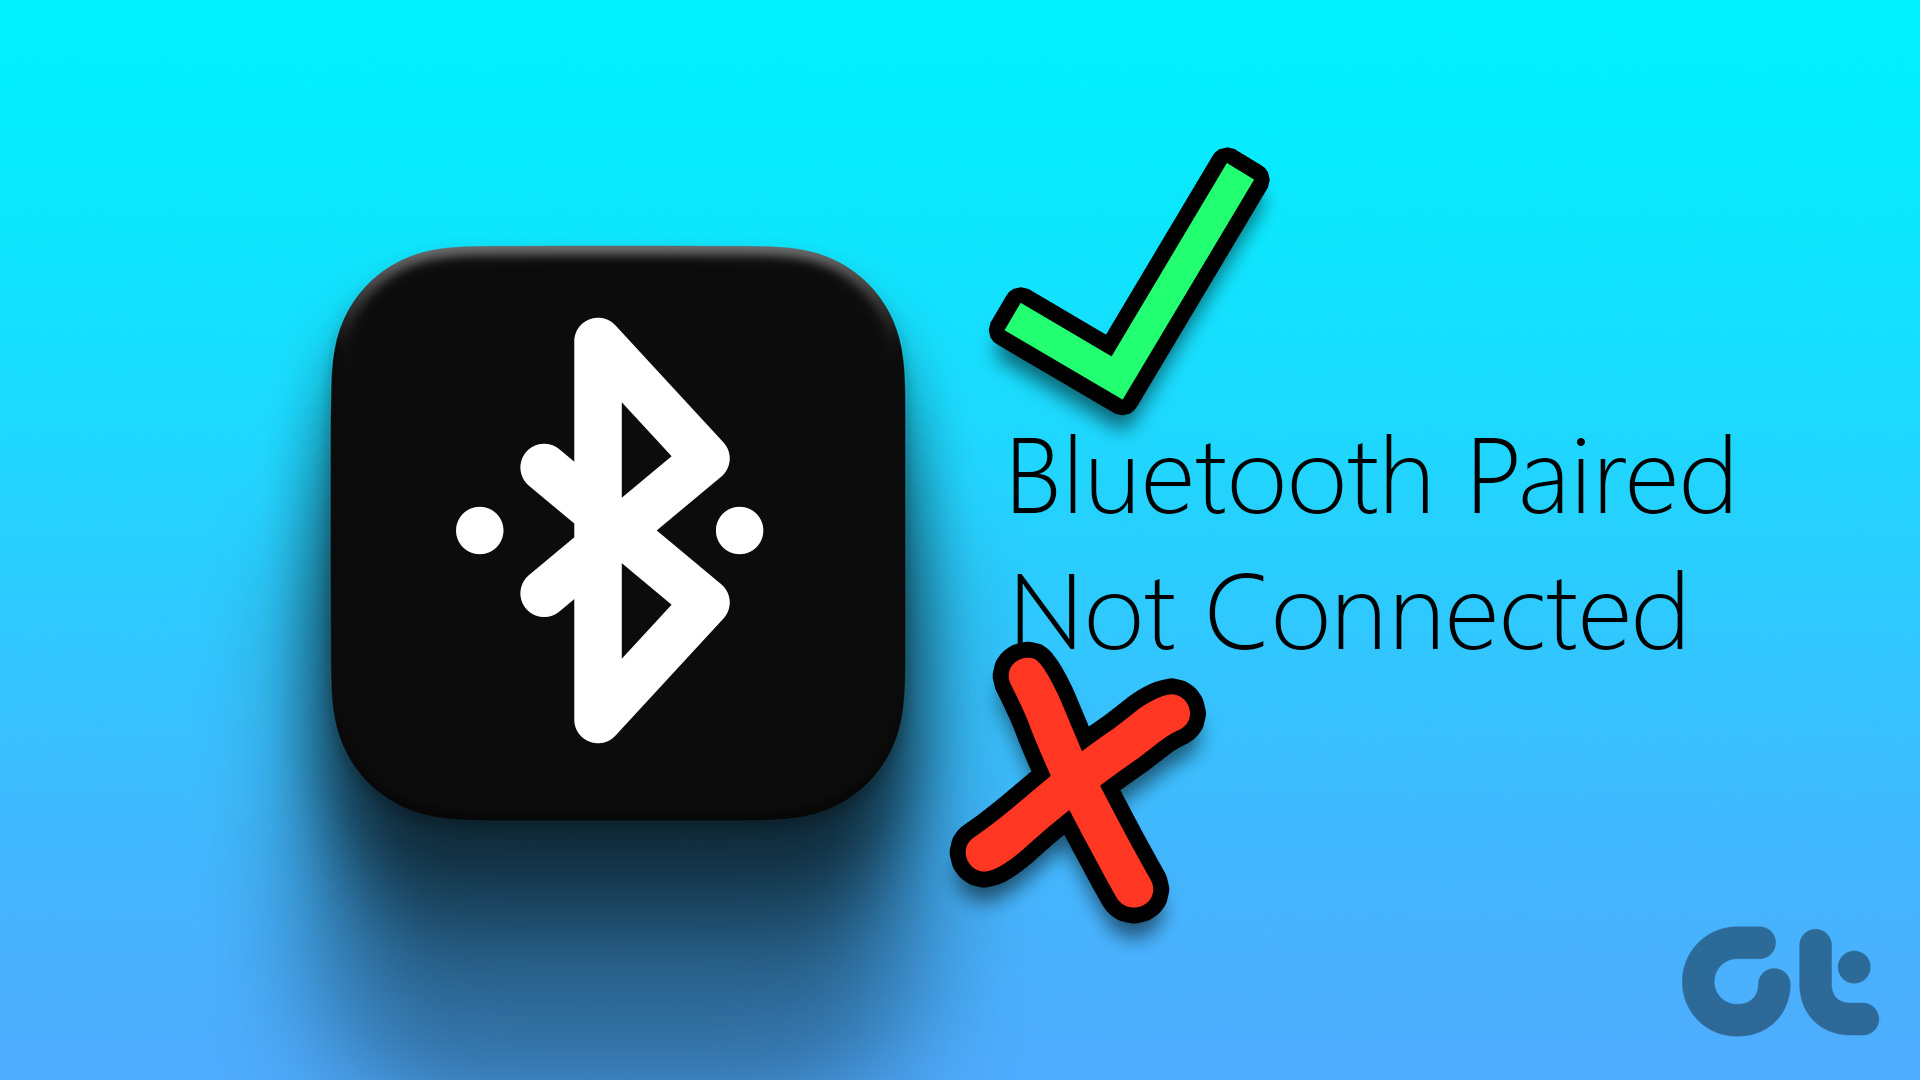 How to Set Up a Bluetooth Device on a PC